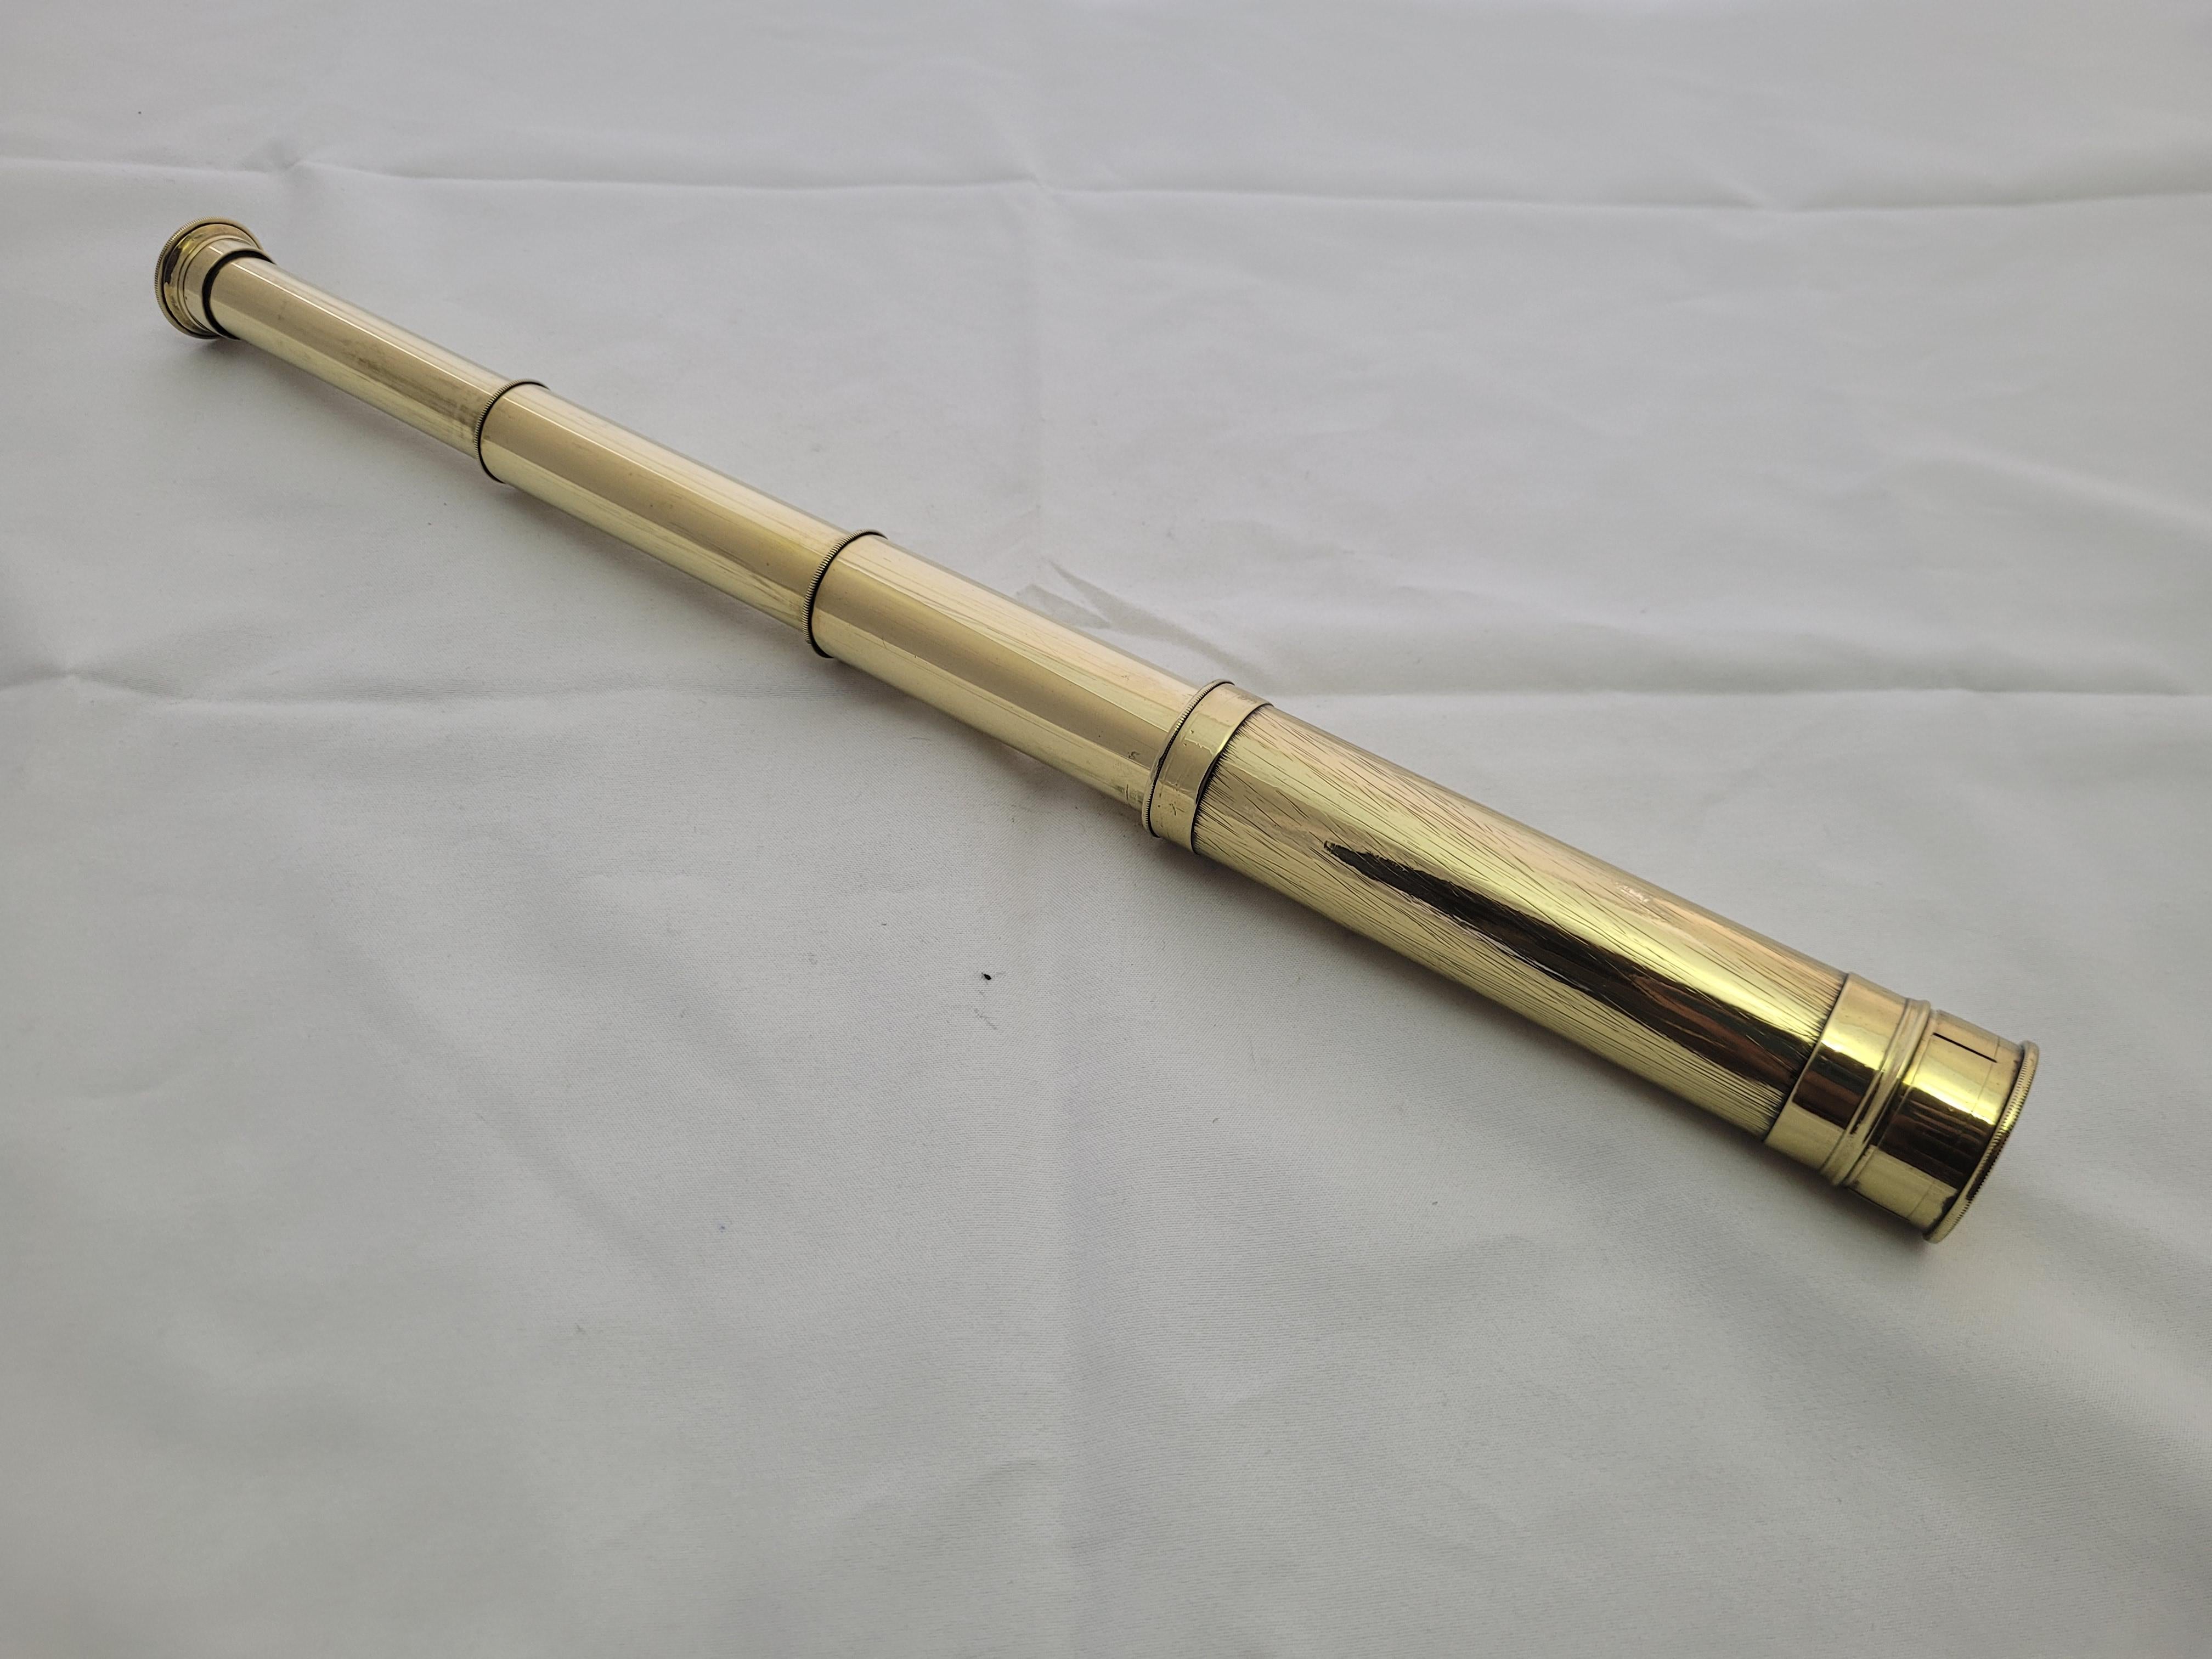 Antique mariners telescope of solid brass that has been polished and the main barrel, eyepiece and cap have been lacquered. The scope has a three draw barrel with eyepiece. Circa 1900

Weight: 1 lb.
Overall Dimensions: 16